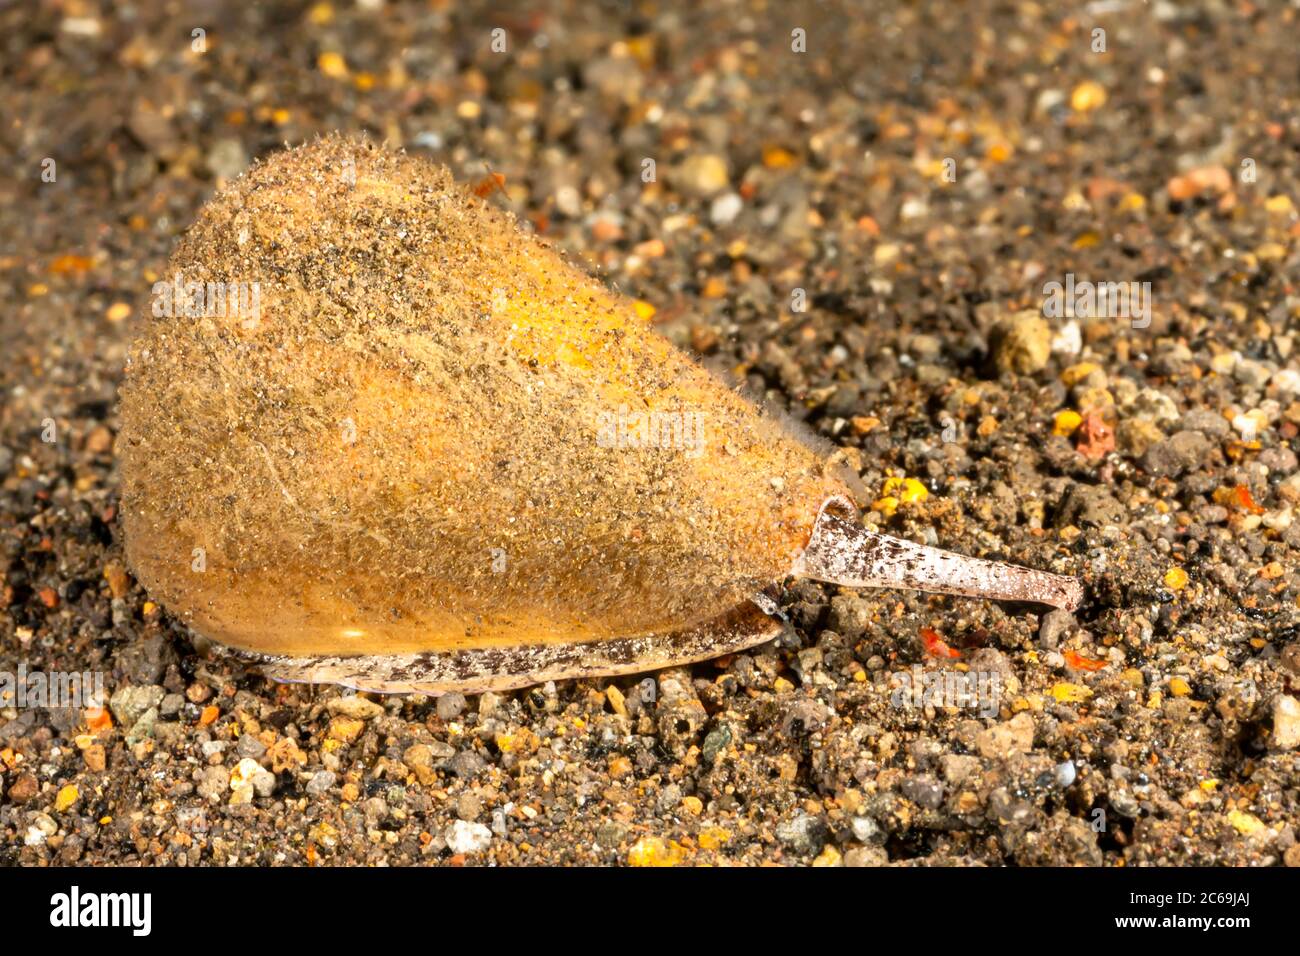 Oak Cone Shell, or Yellow Cone Shell, Conus quercinus. Alive underwater showing the syphon and eye. Komodo, Indonesia. Stock Photo